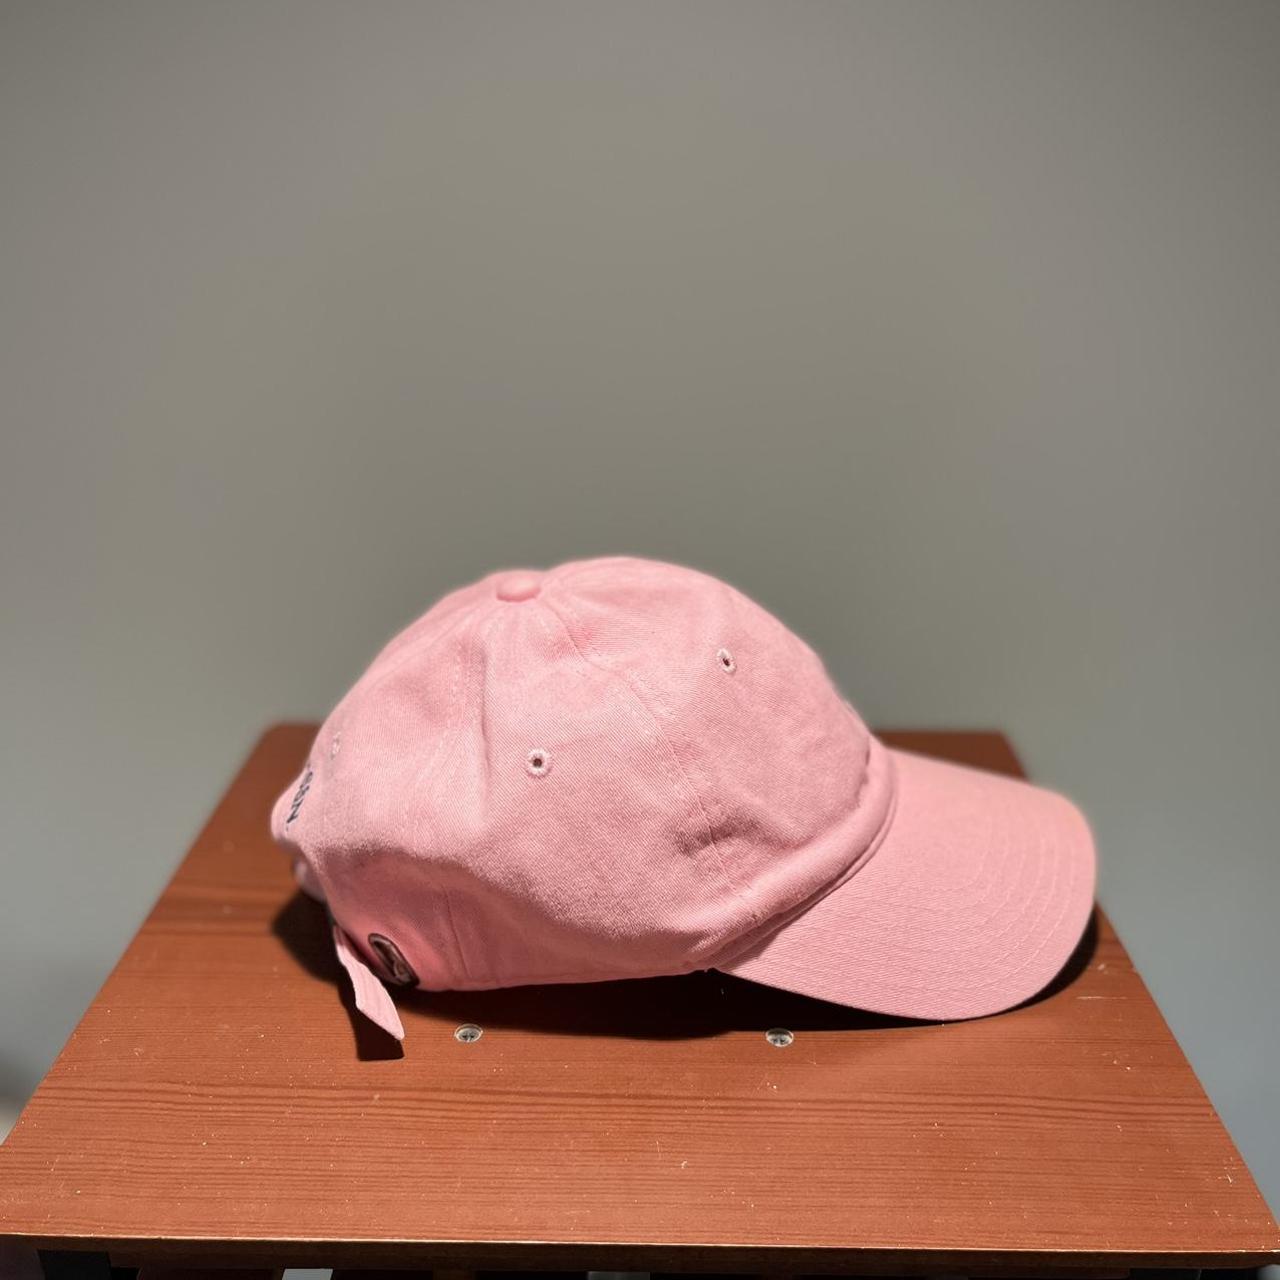 U.S. Polo Assn. Men's Pink and Navy Hat (2)